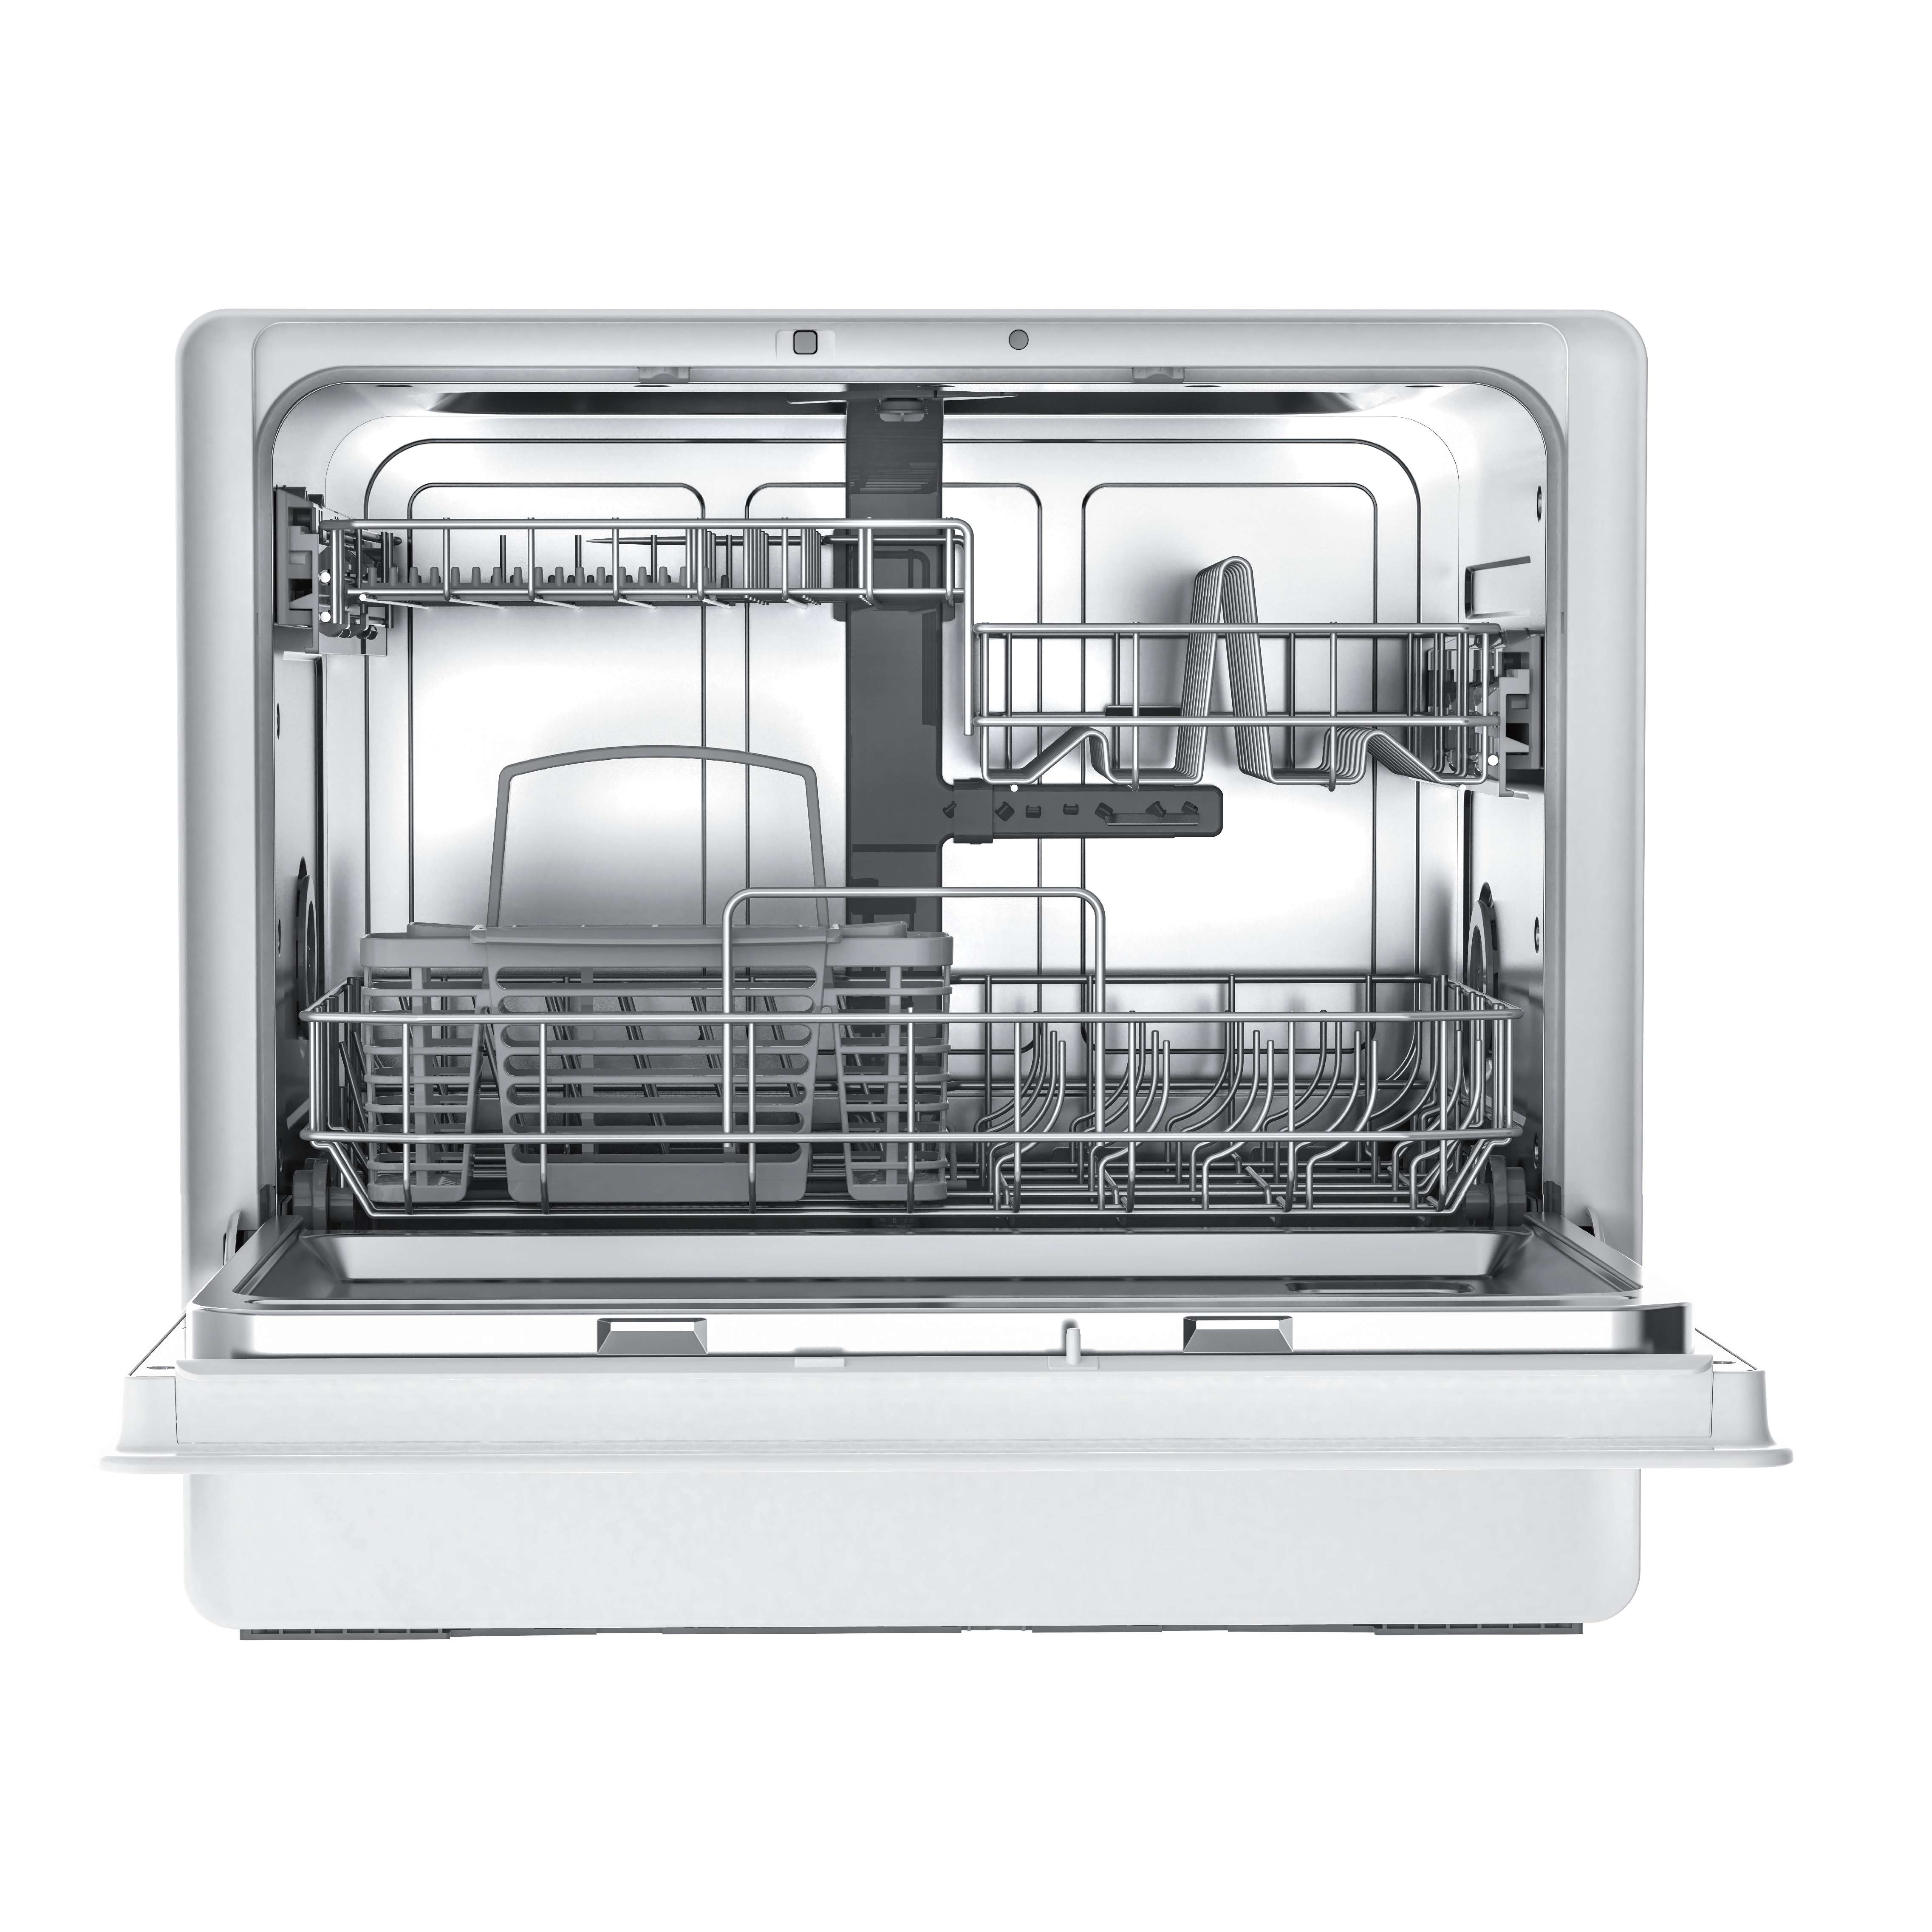 Table-top Dishwasher 55cm